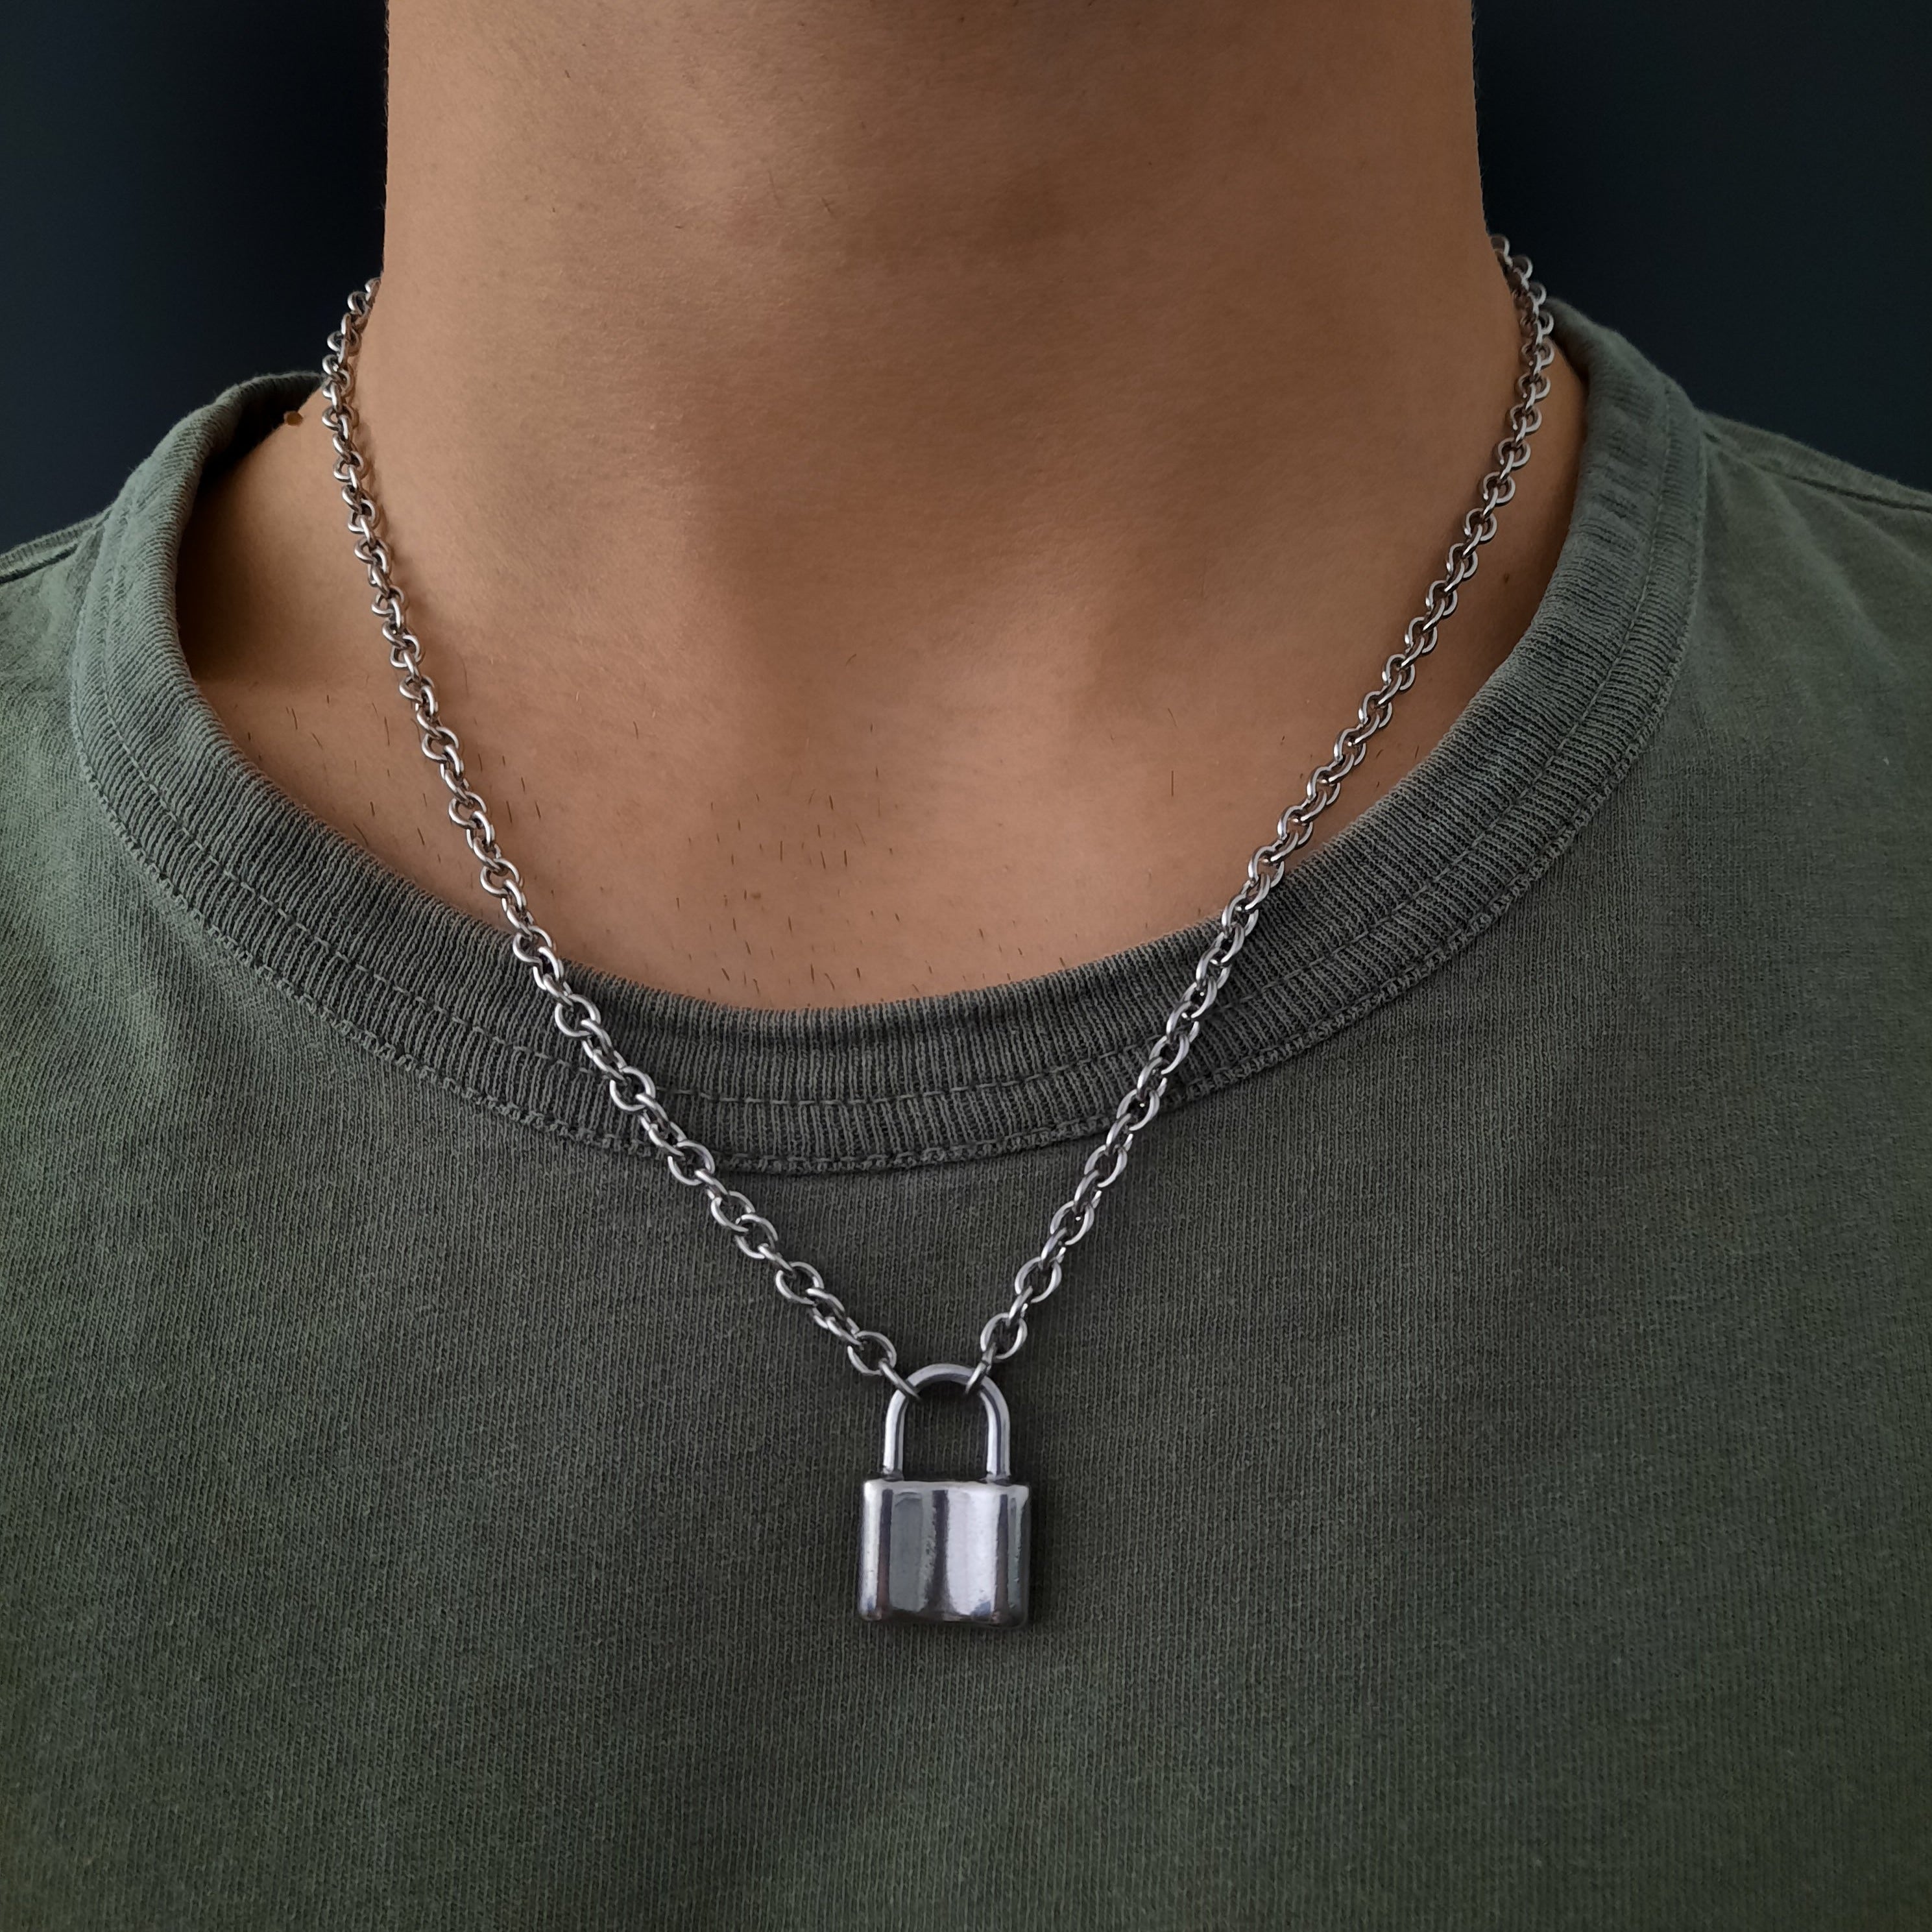 Buy Padlock Necklace Stainless Steel Lock Chain for Men Women Silver 18-24  inch (padlock + O chain silver, 24) at Amazon.in